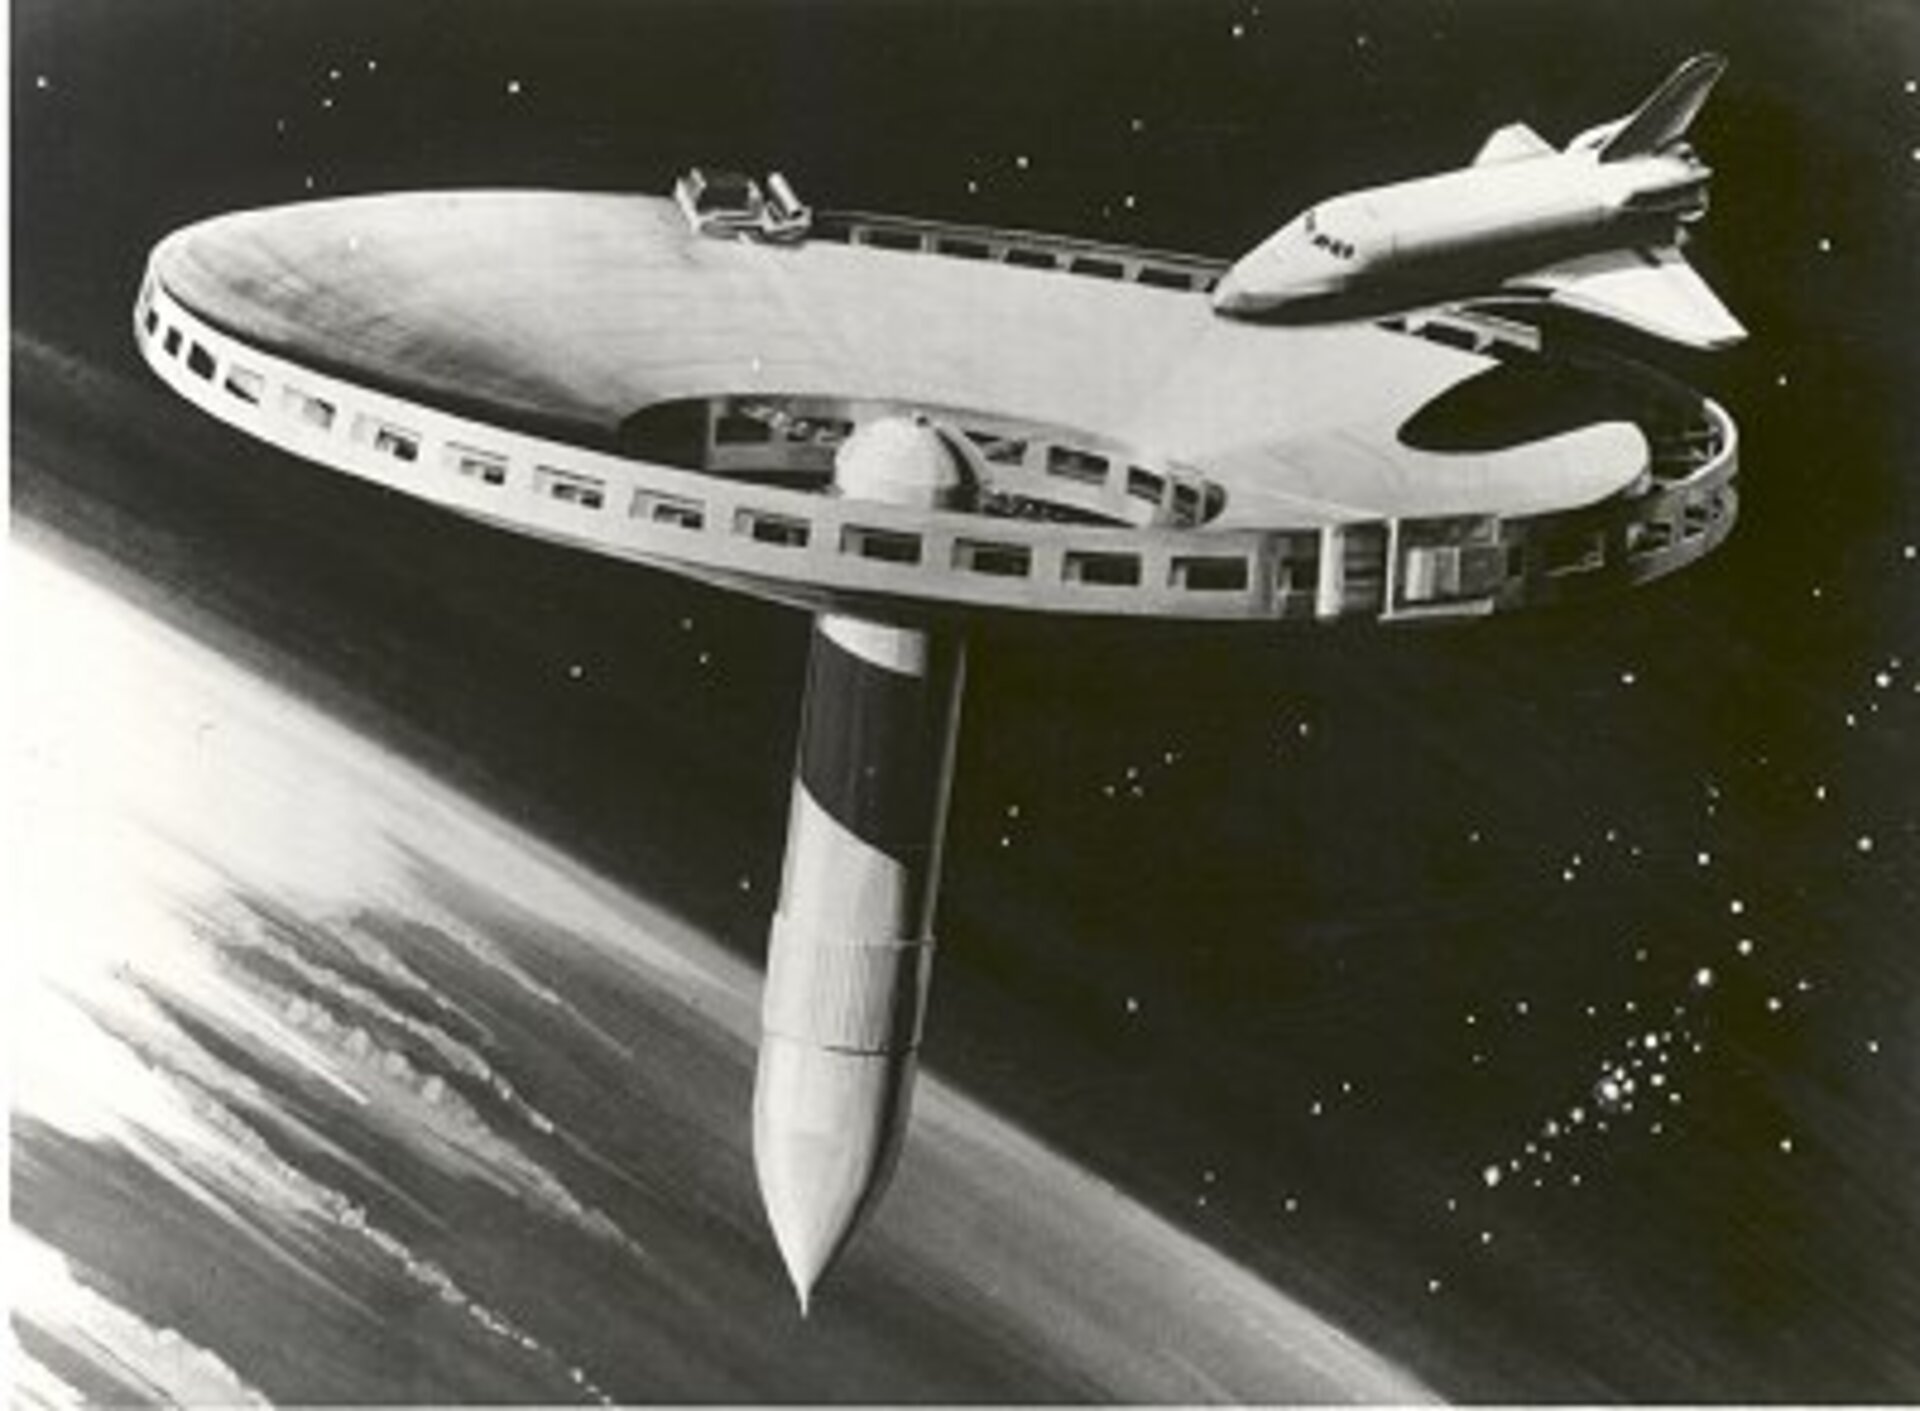 Wheel or doughnut shaped space stations were all the rage in the 50's and 60's